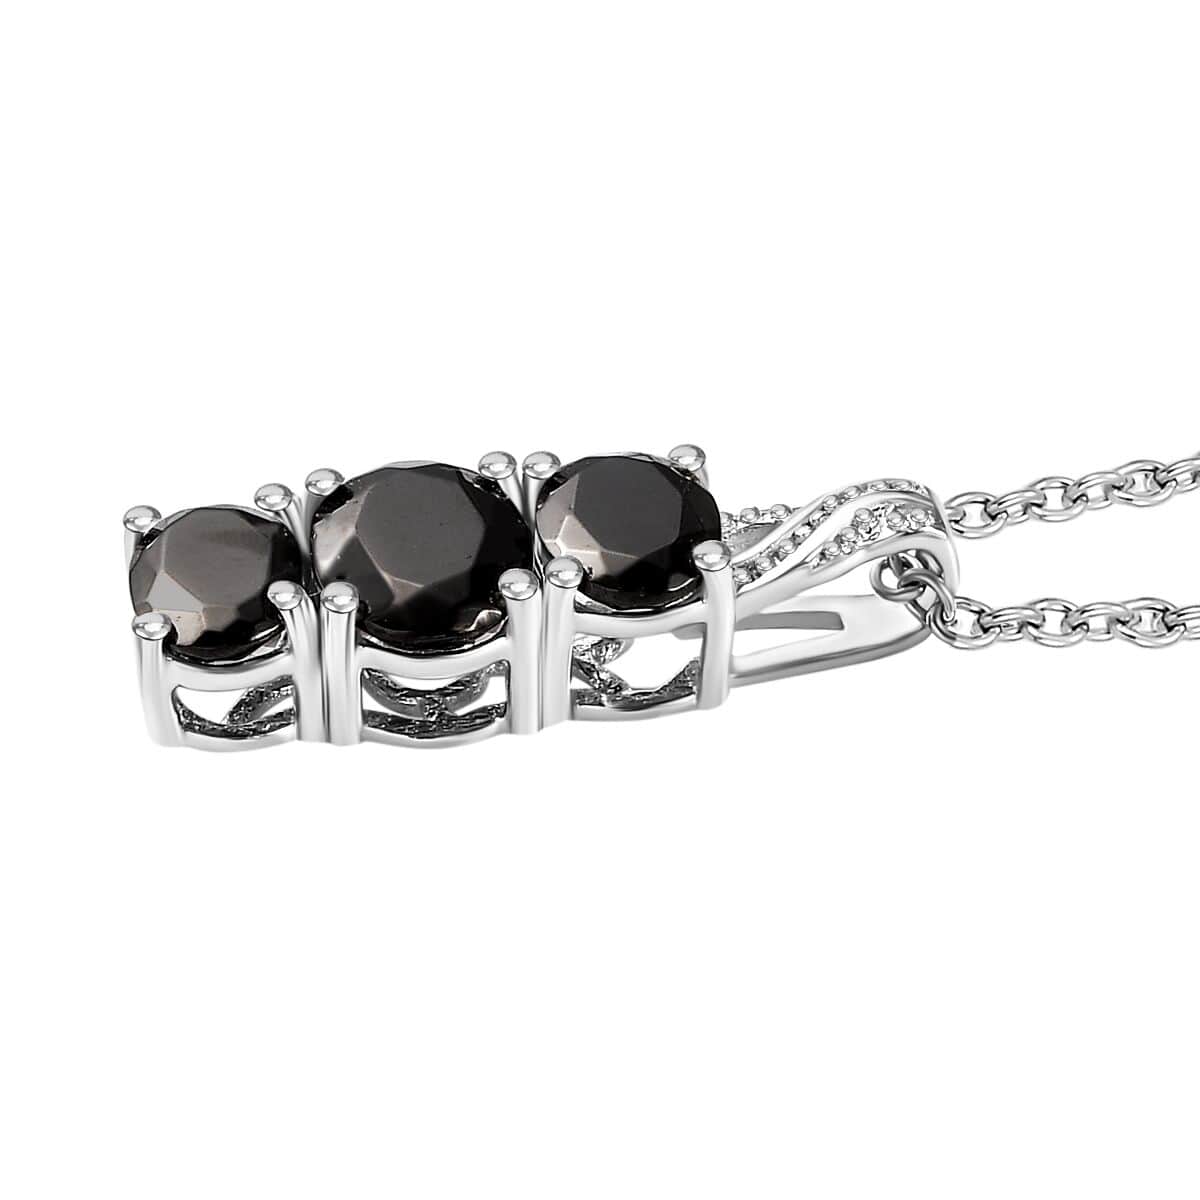 Elite Shungite Jewelry Set, Shungite 3 Stone Ring, Shungite Stud Earrings, Shungite 3 Stone Pendant Necklace, 20 Inch Necklace, Platinum Over Sterling Silver and Stainless Steel Jewelry Set 5.25 ctw image number 5